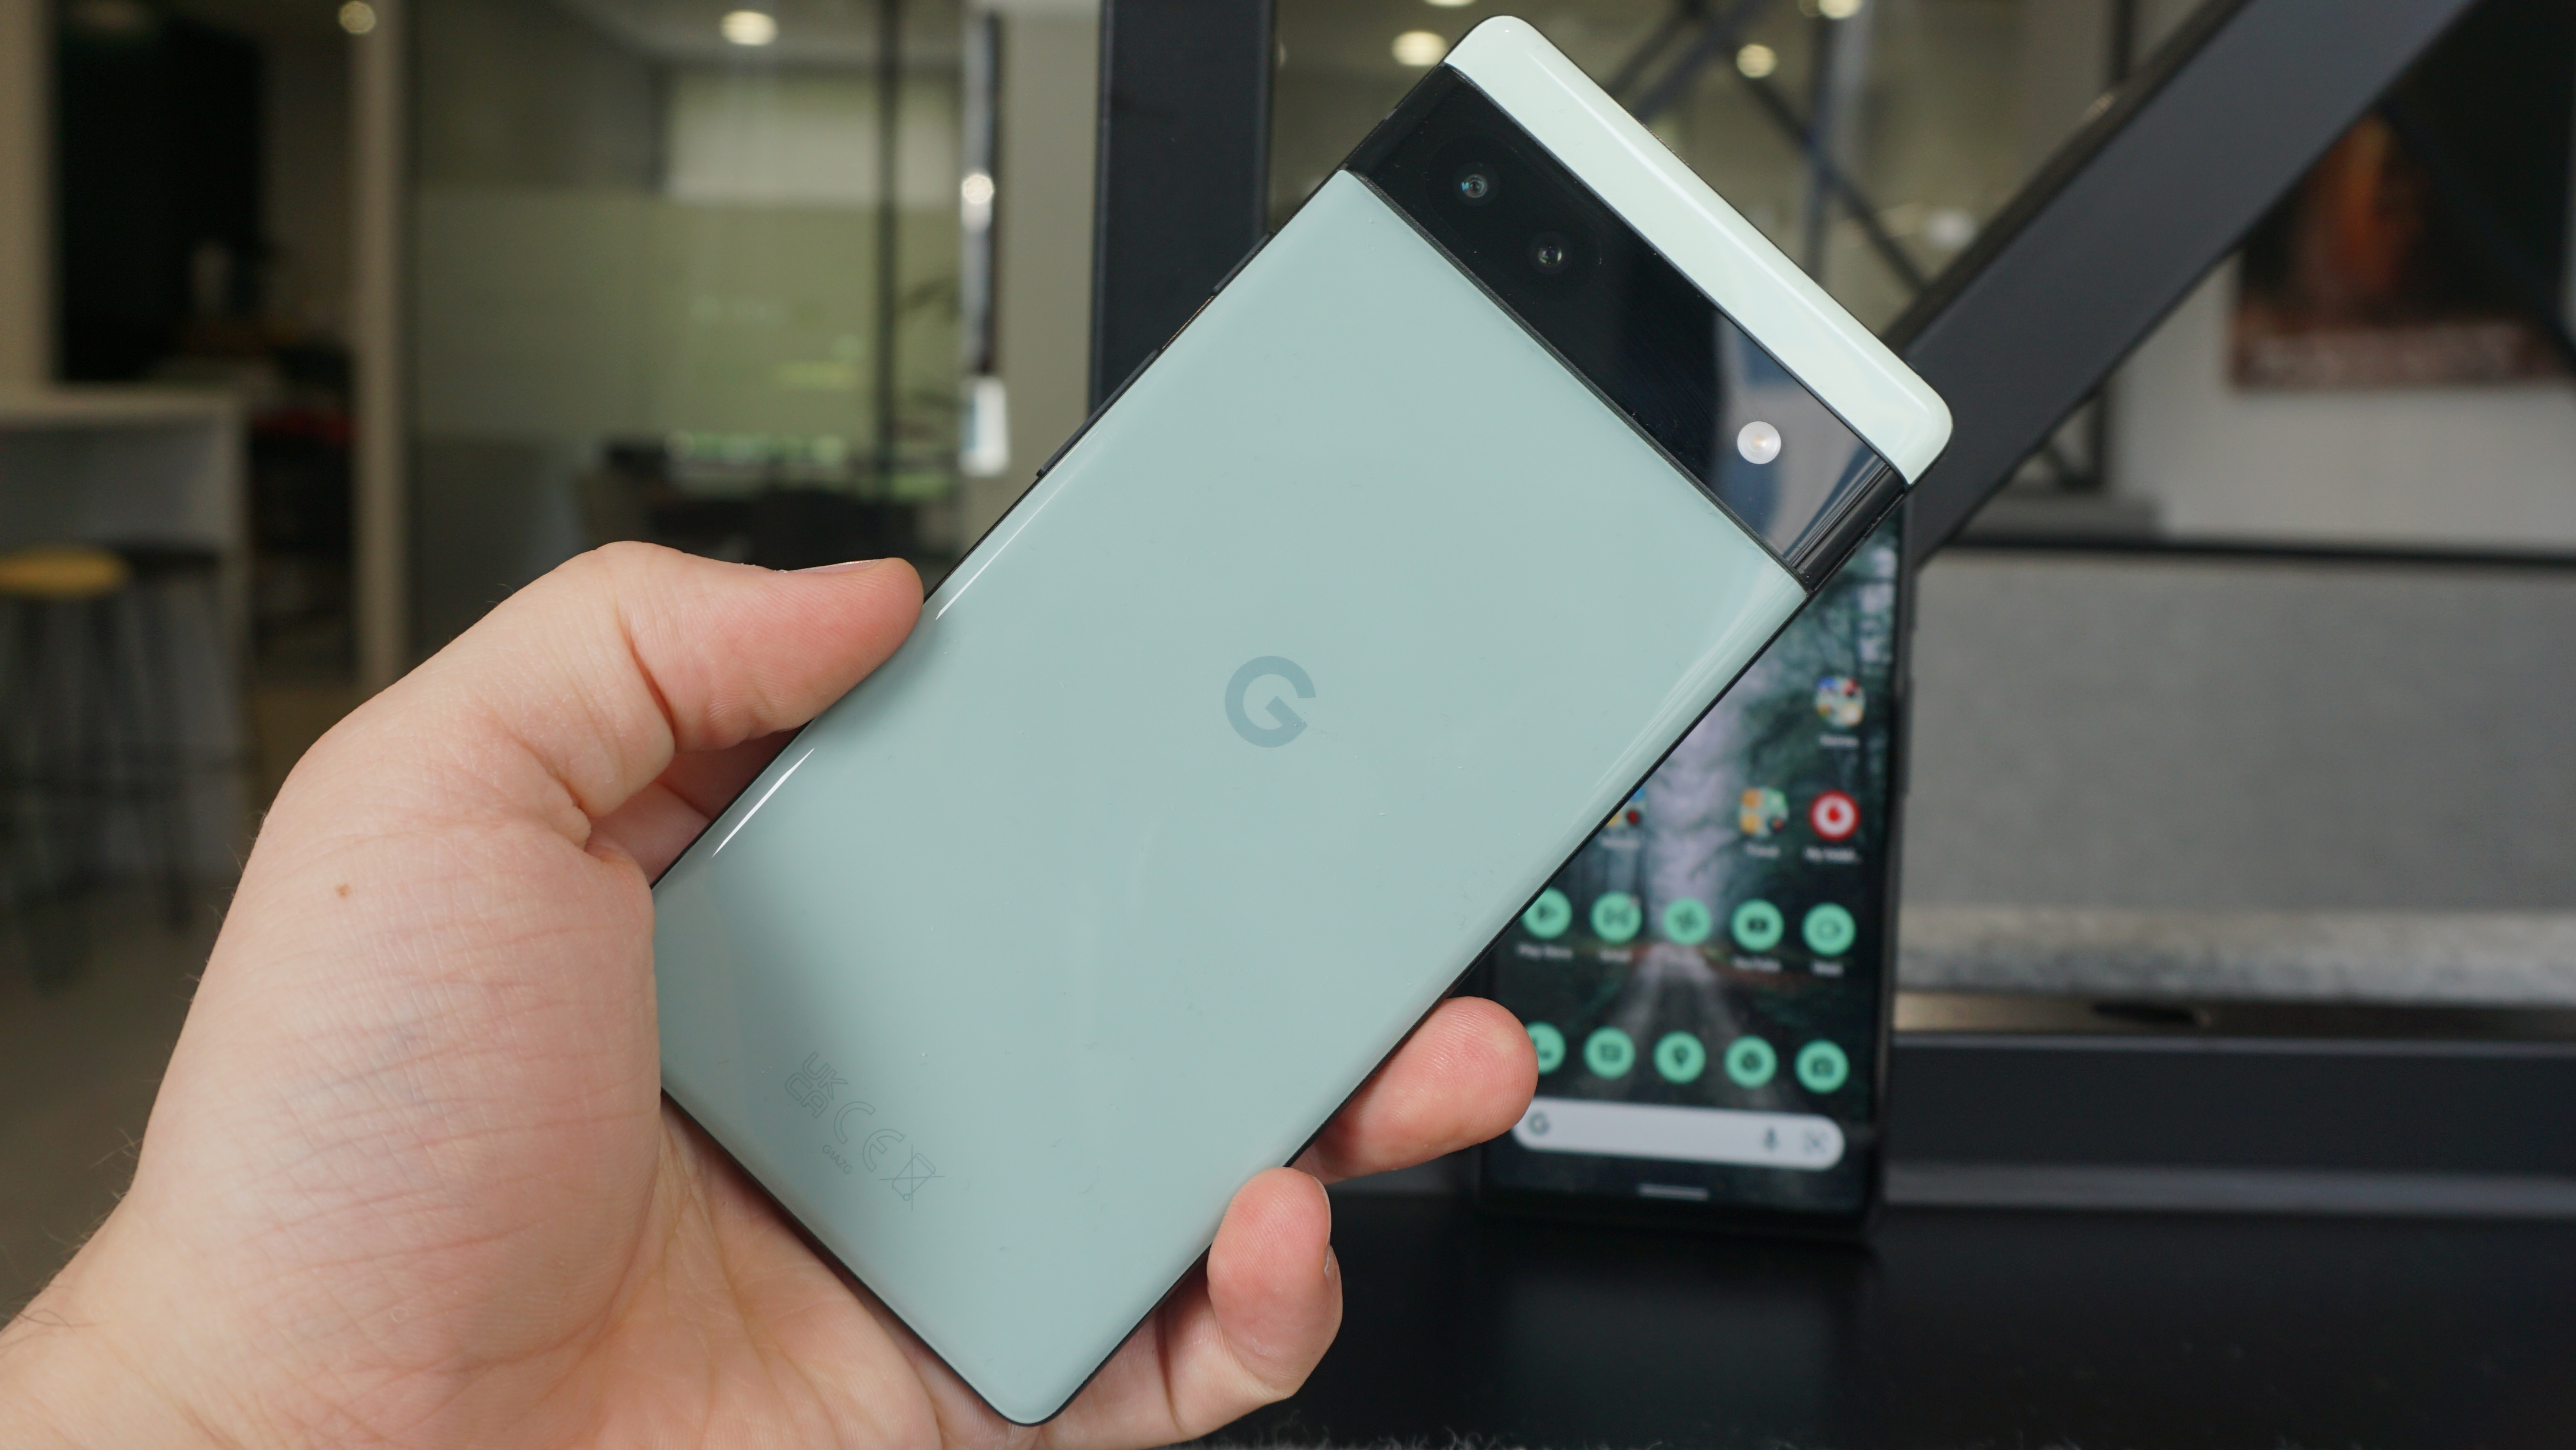 A Google Pixel 6a in someone's hand, from behind